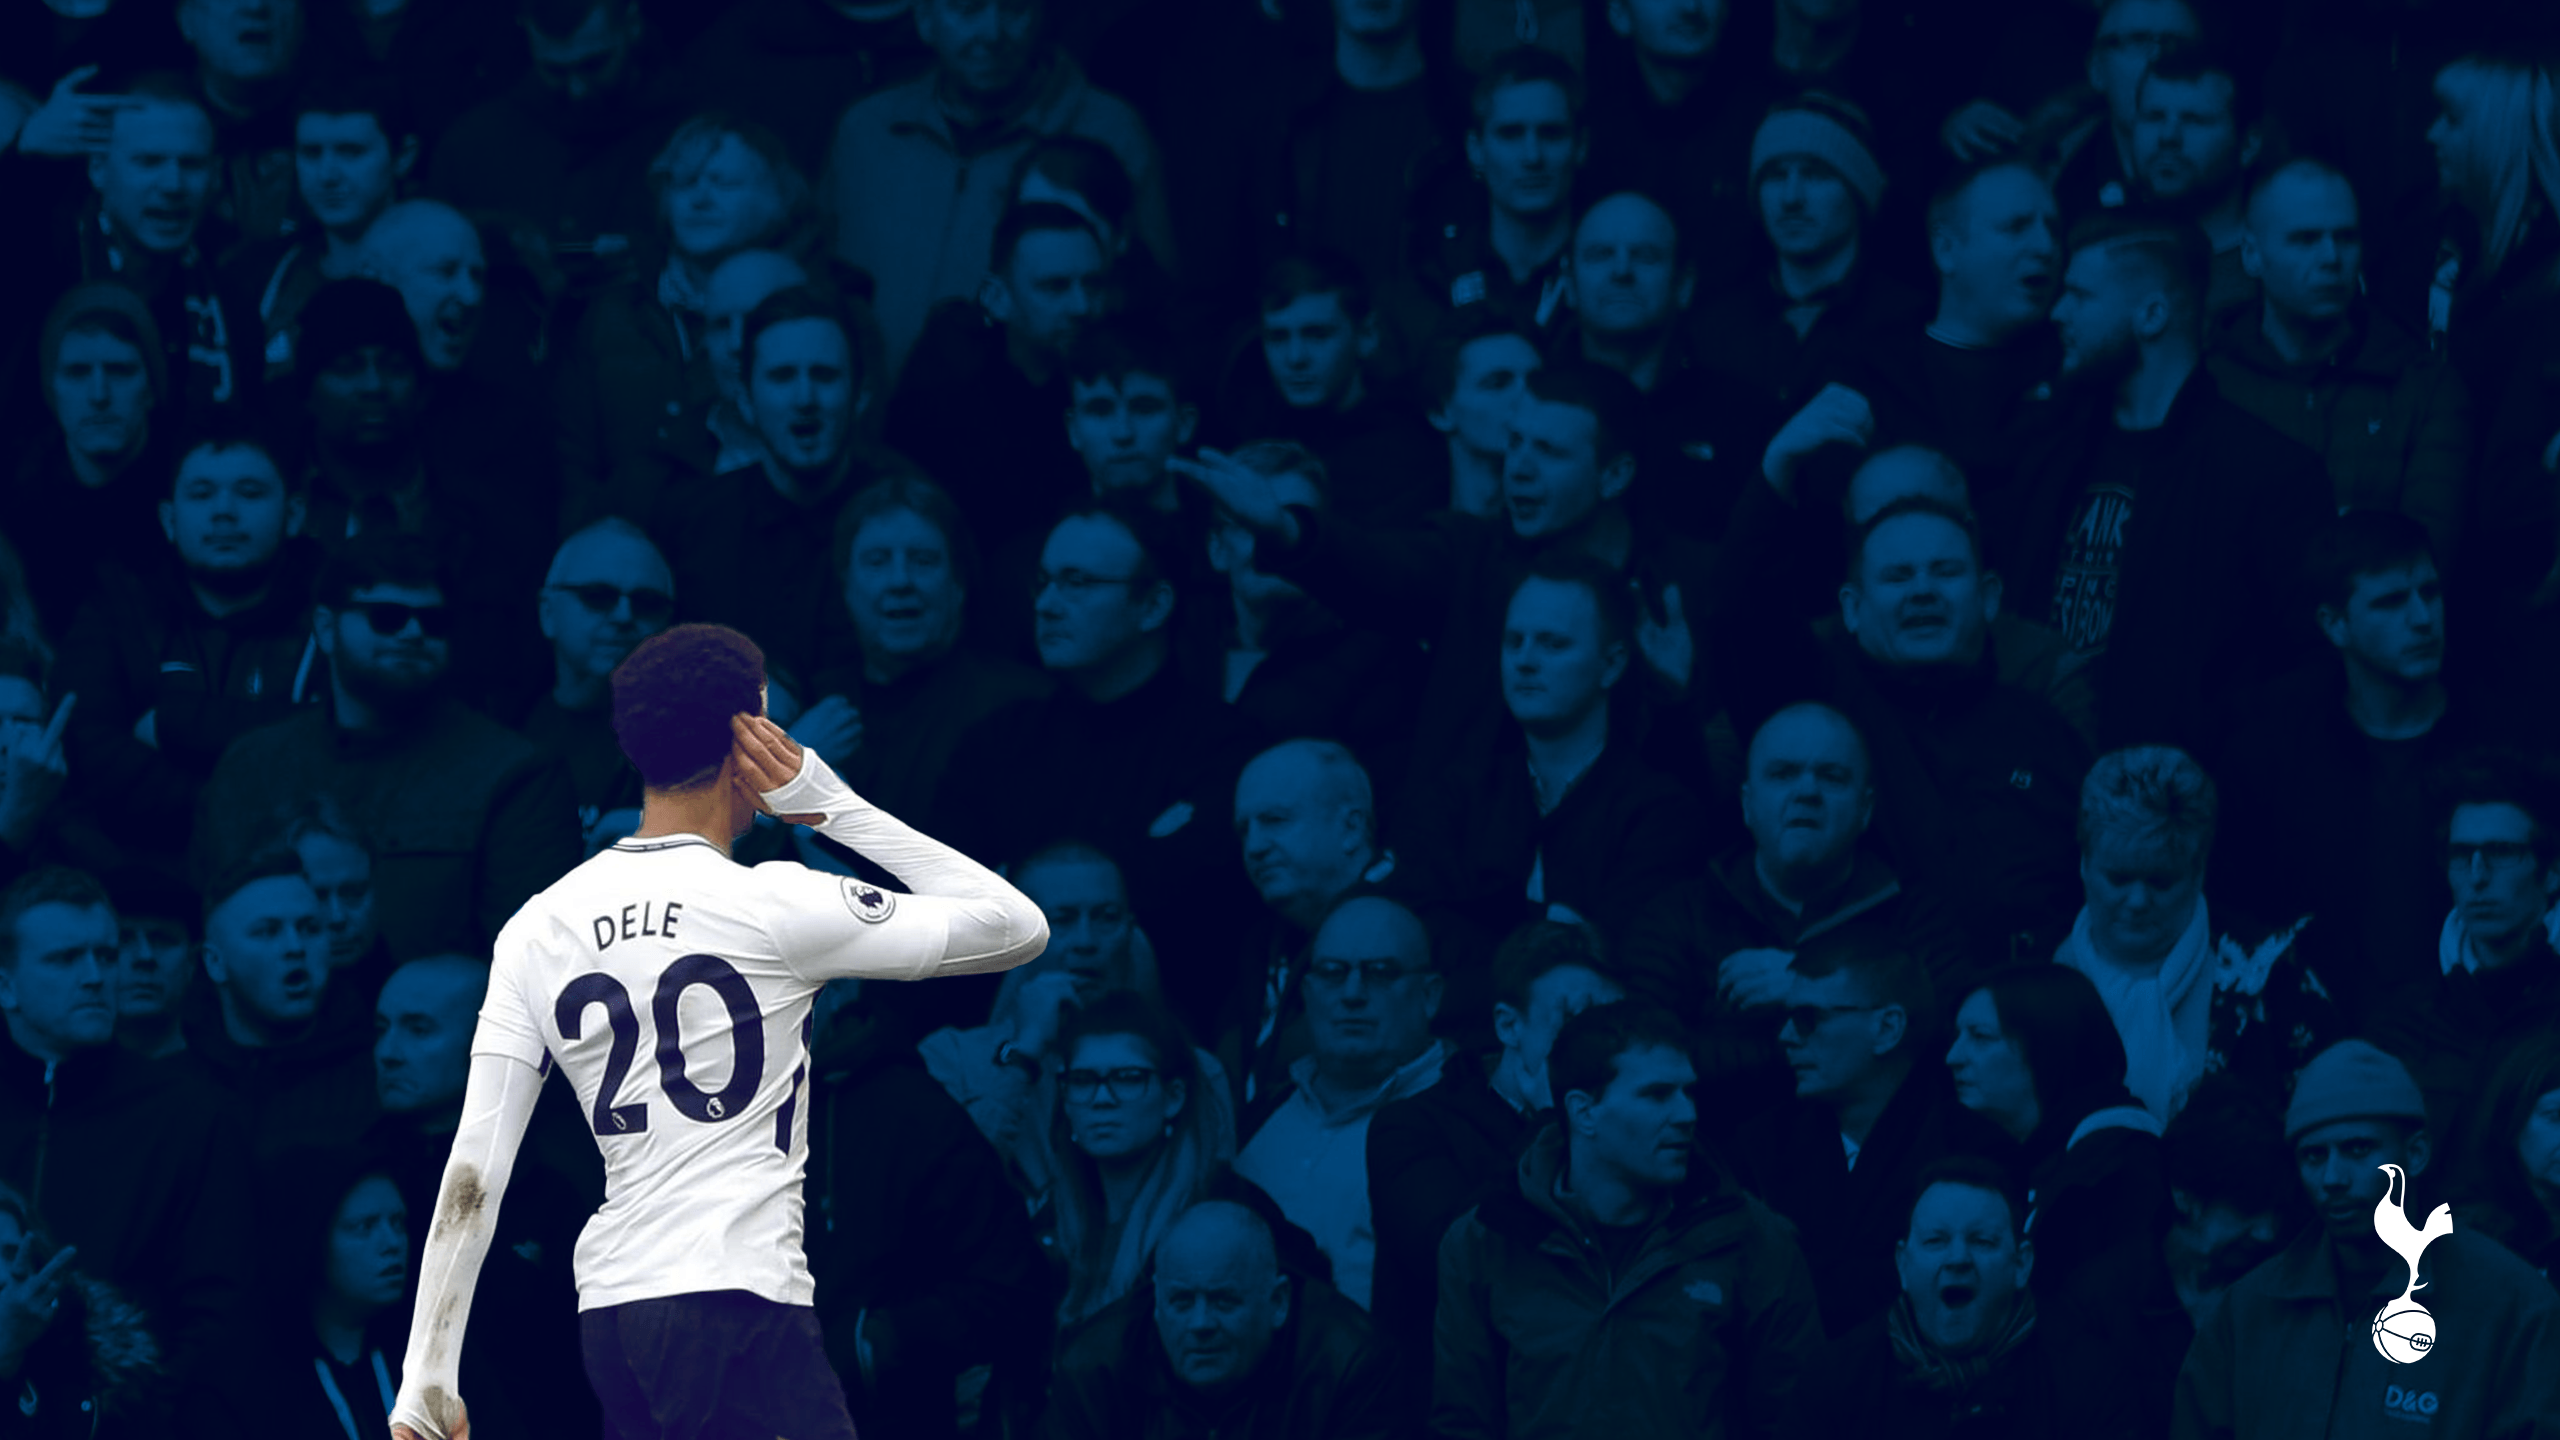 New Spurs Wallpaper (REQUESTED) Dele Celebrates infront